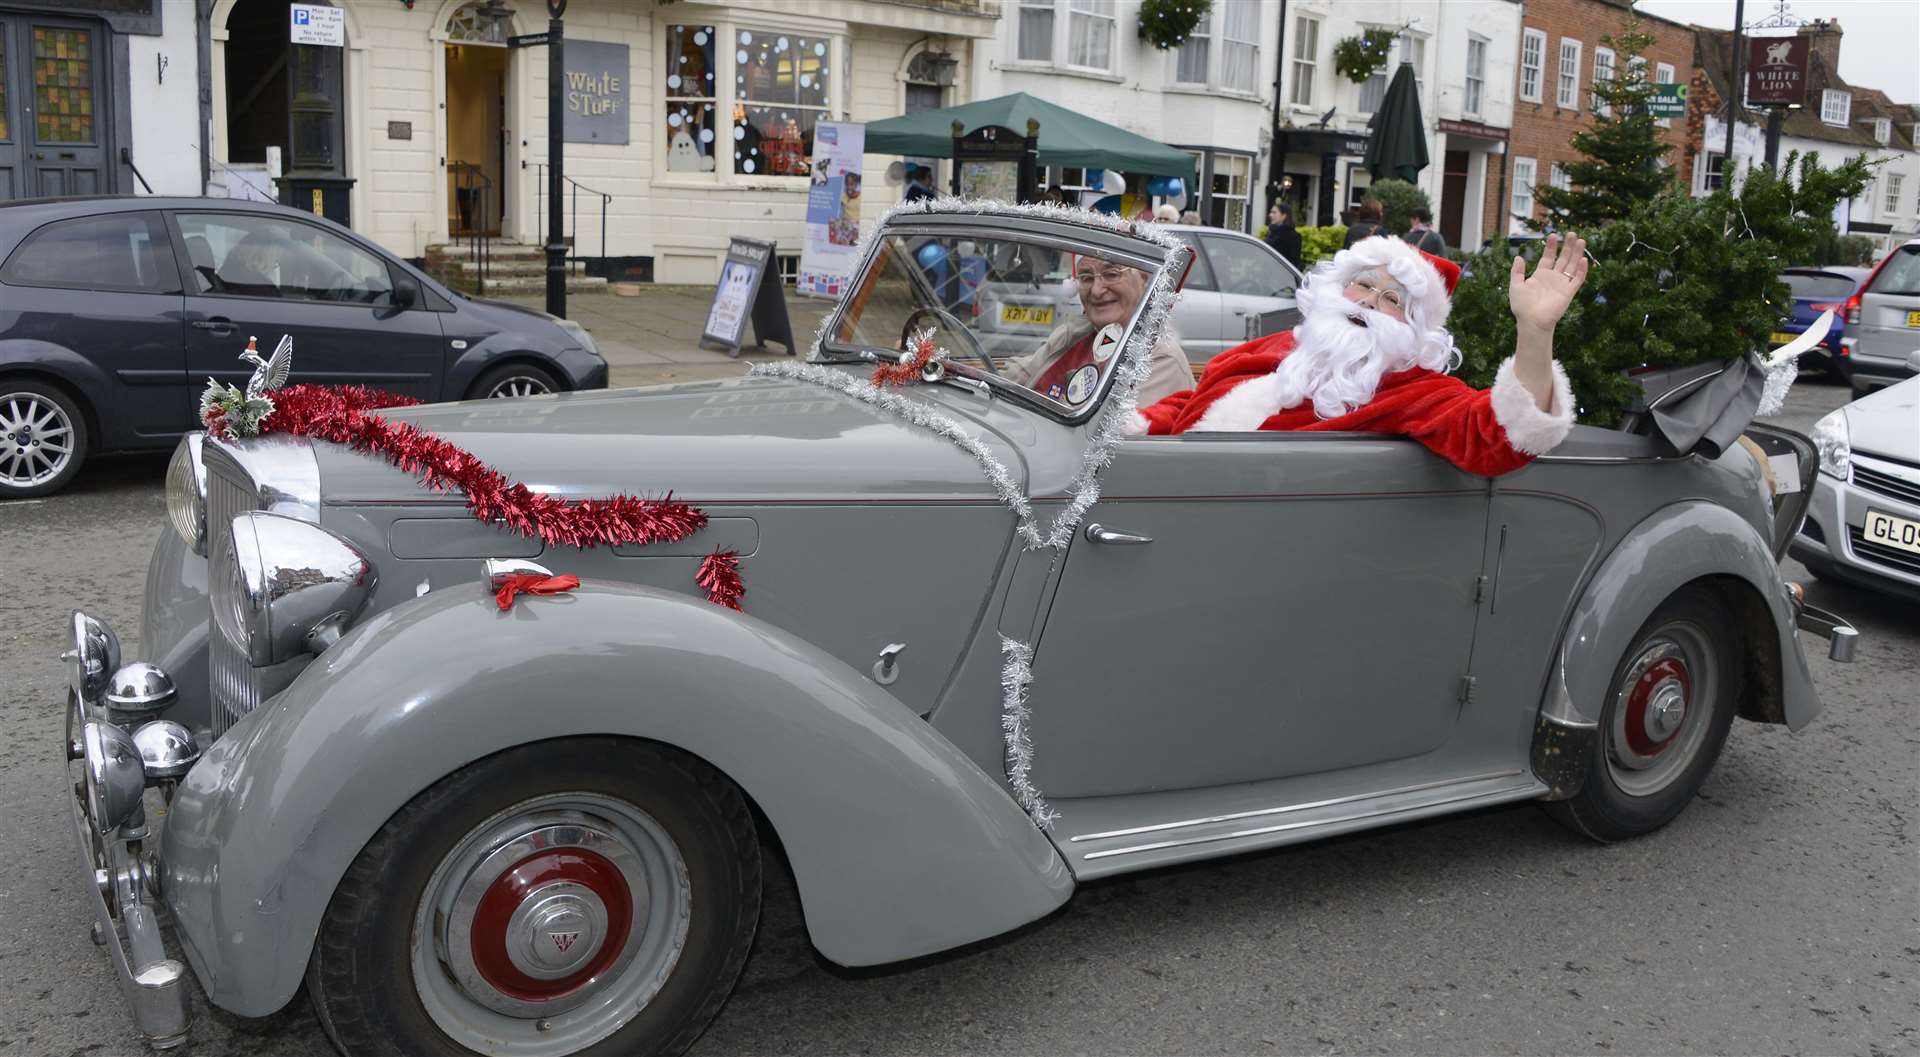 Father Christmas will be at Tenterden Christmas market Picture: Paul Amos